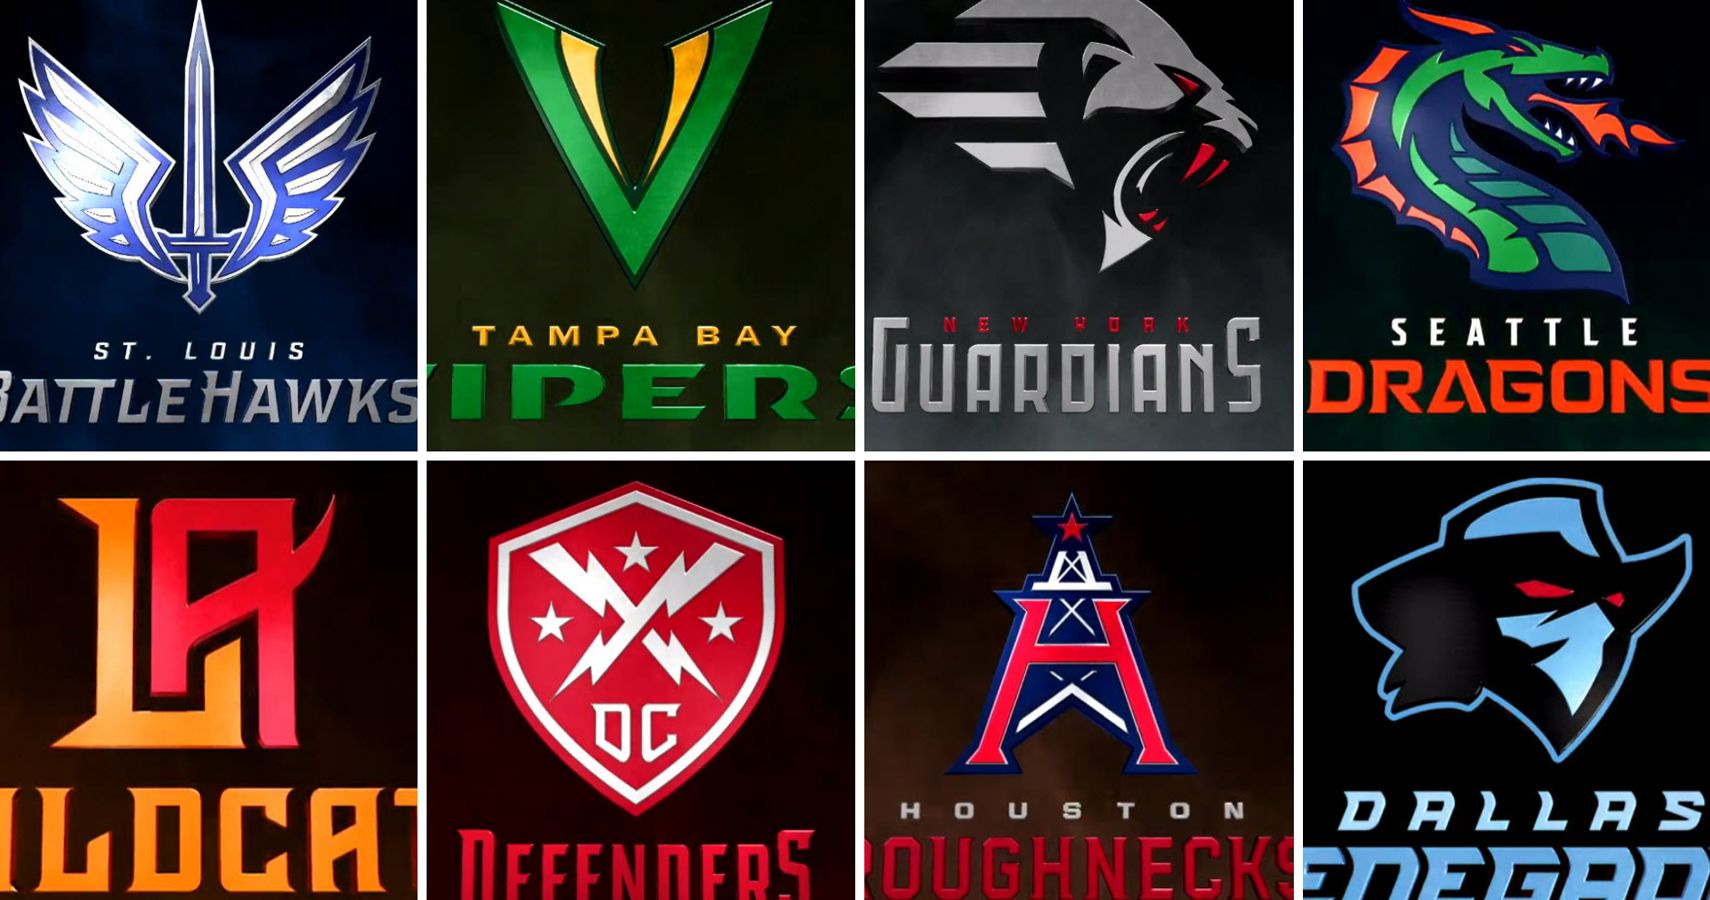 XFL team names and logos revealed ahead of 2023 relaunch